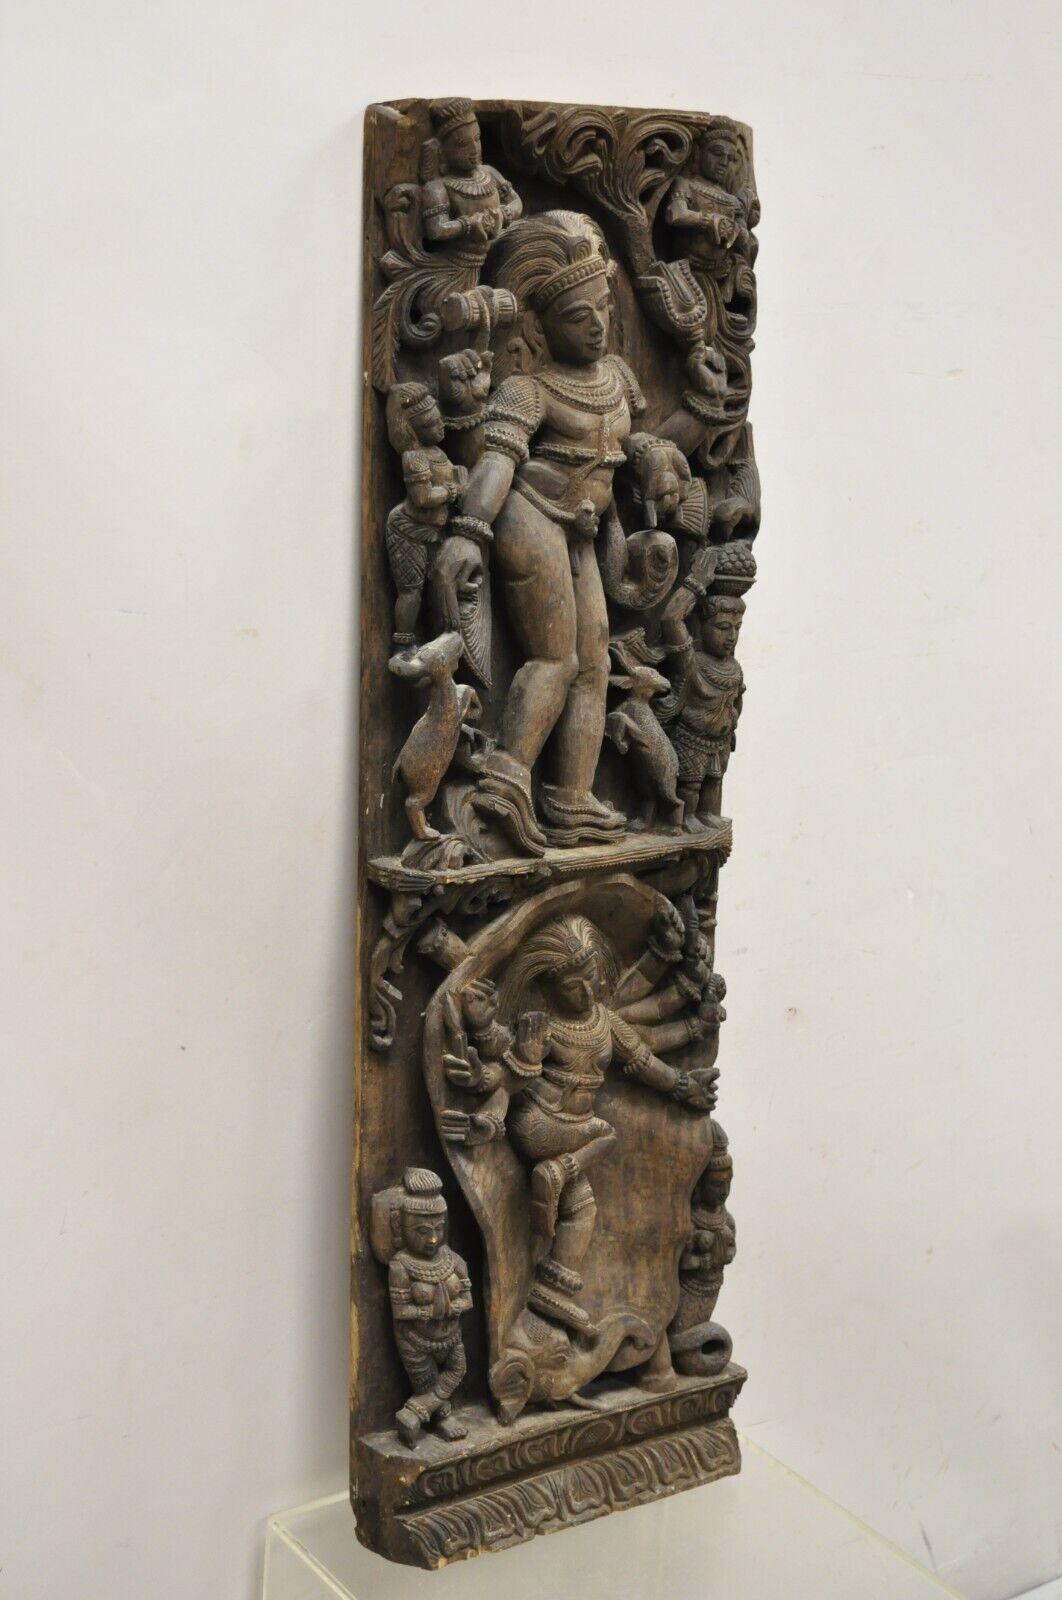 Vintage South Indian carved wood relief panel figural krishna sculpture. Item features impressive figural hand carvings throughout, very nice vintage item, great style and form. Circa Mid to Late 20th Century. Measurements: 41